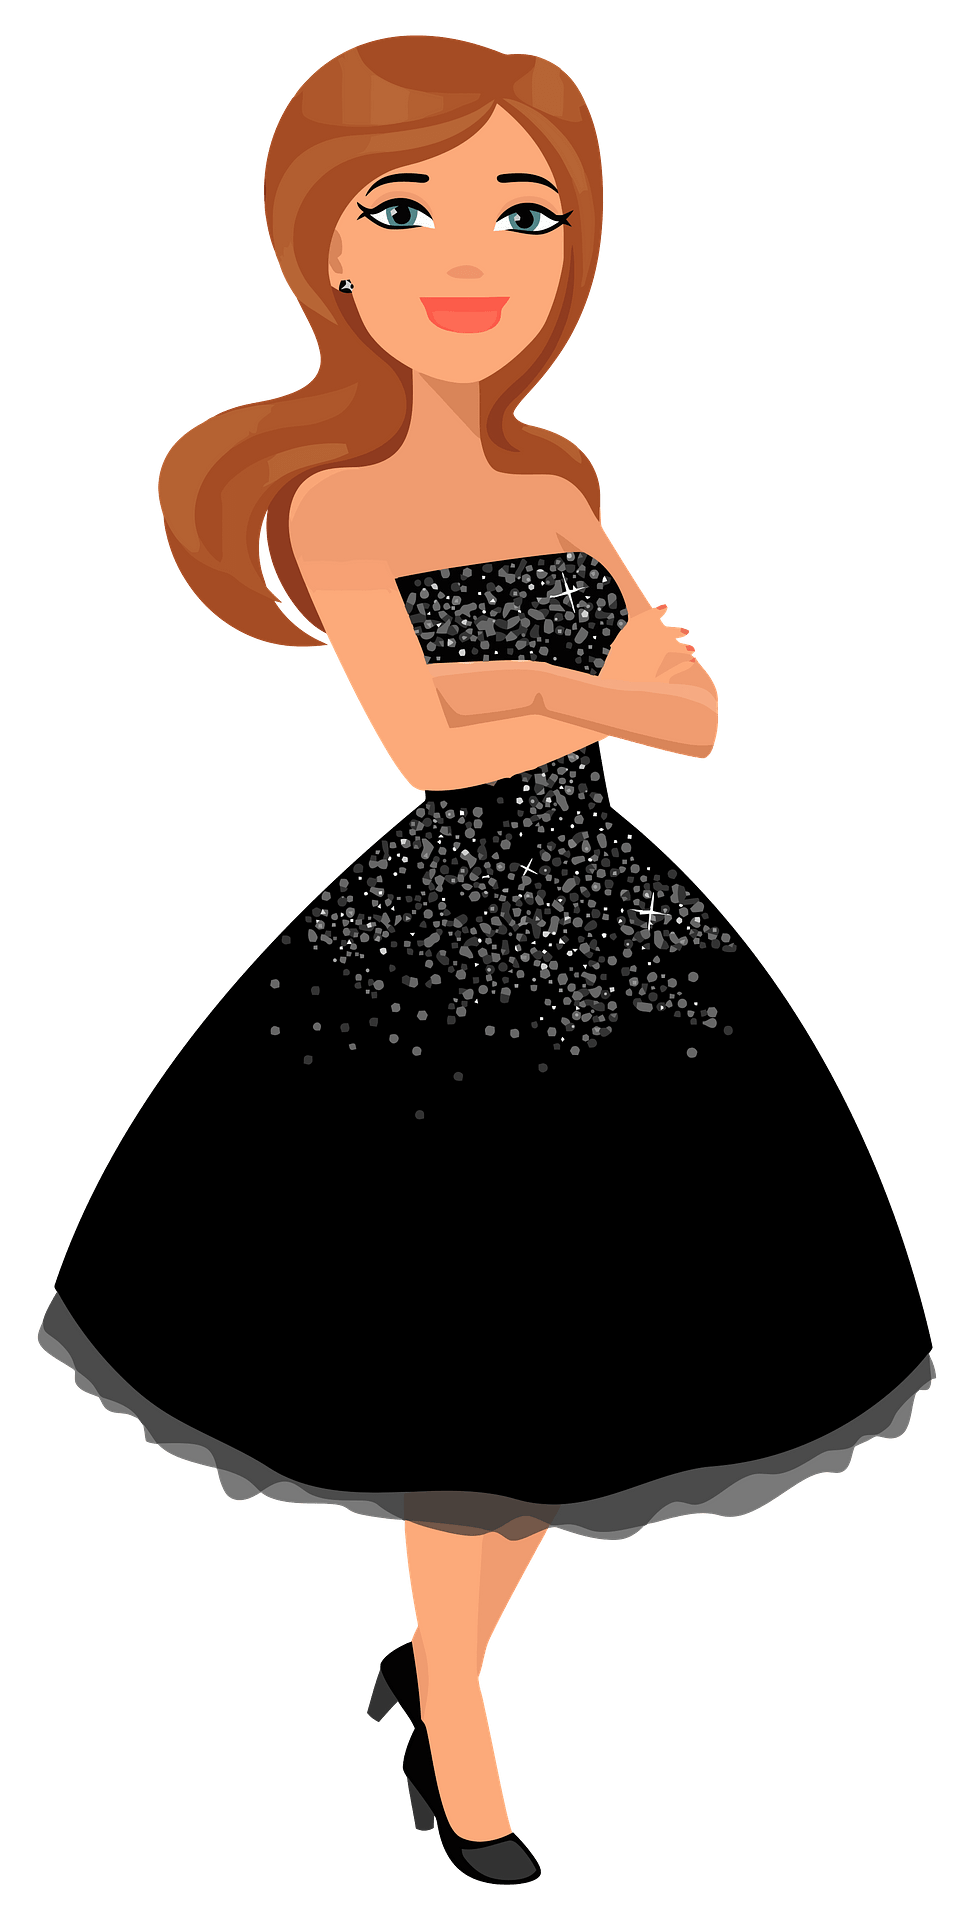 Dress Up Your Designs with Wear Cliparts - Clip Art Library